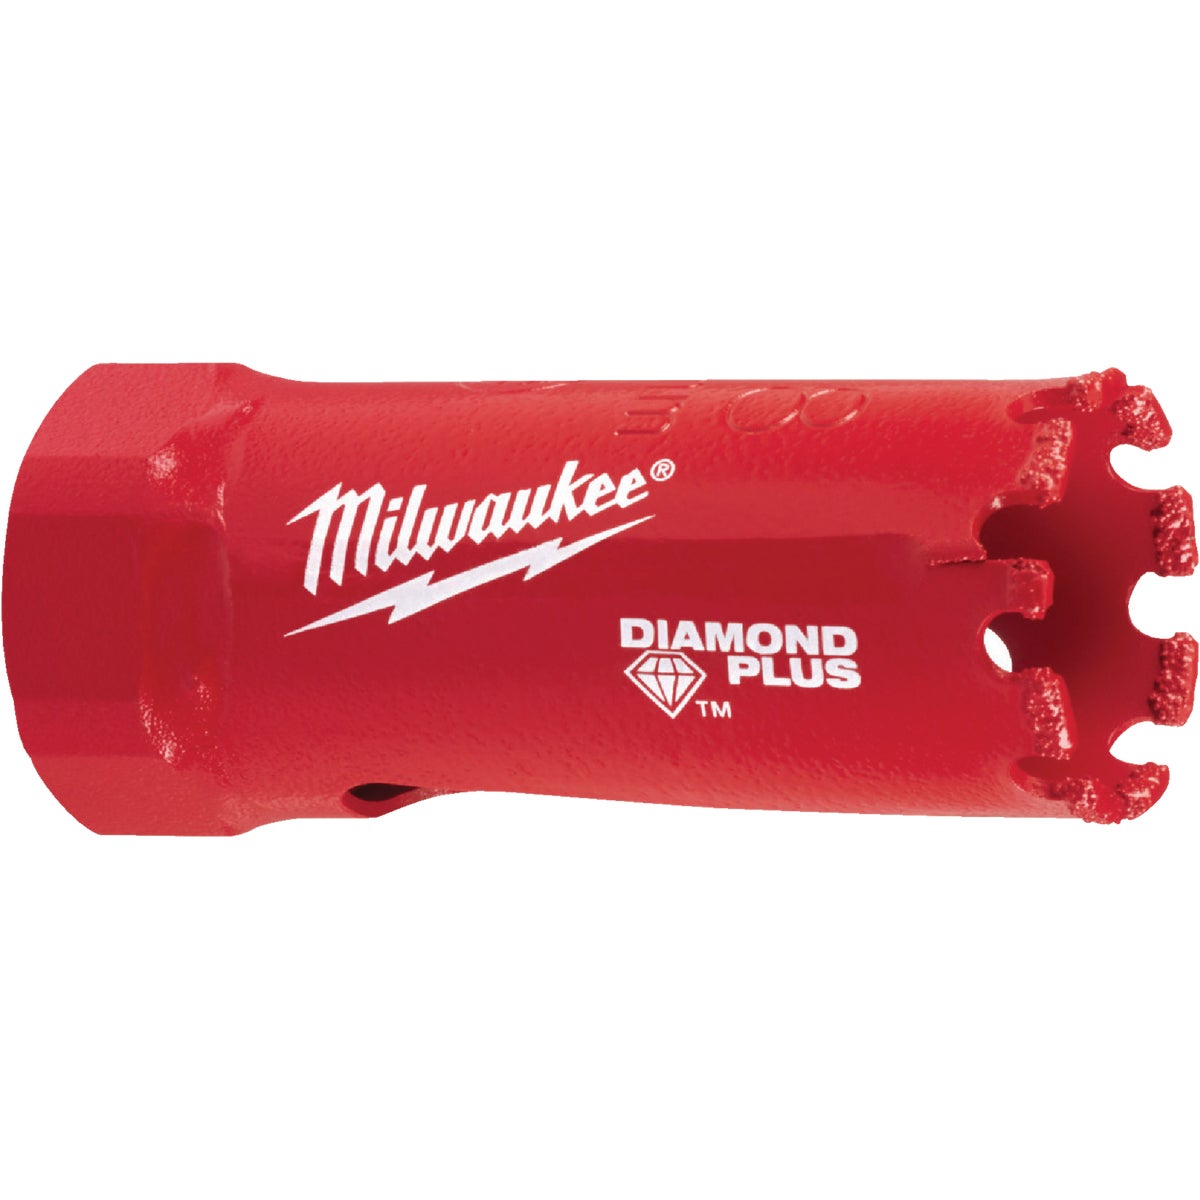 Item 302572, Diamond Plus offers greater durability and toughness.